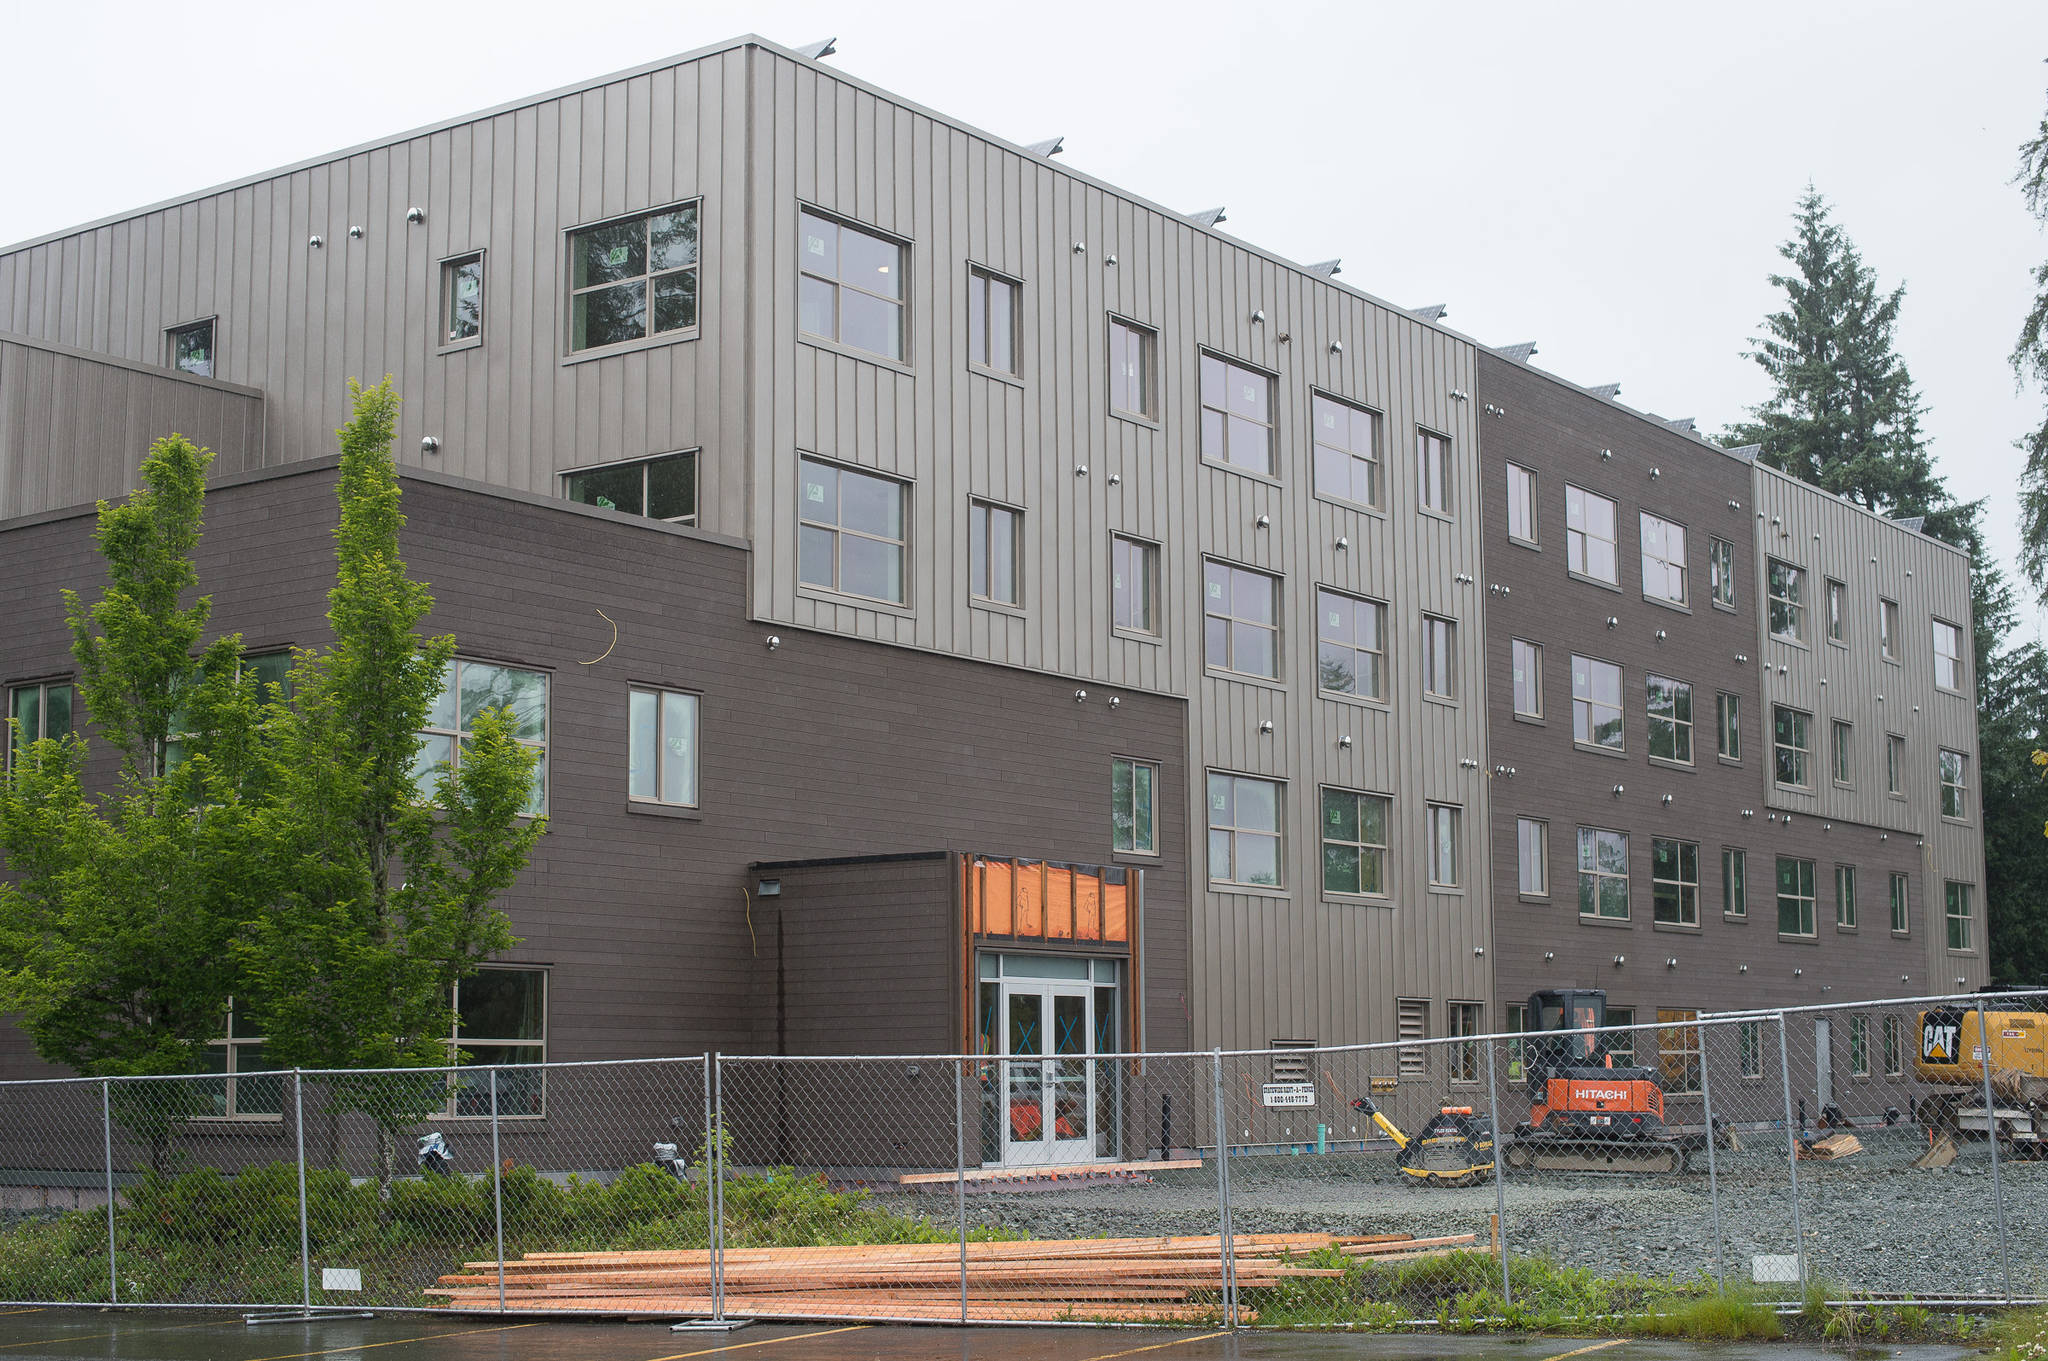 Trillium Landing is a 49-unit apartment complex currently under construction in the Vintage Business Park for persons aged 55 and over. The complex includes studios, one and two-bedroom units and is scheduled to open in September. (Michael Penn | Juneau Empire)